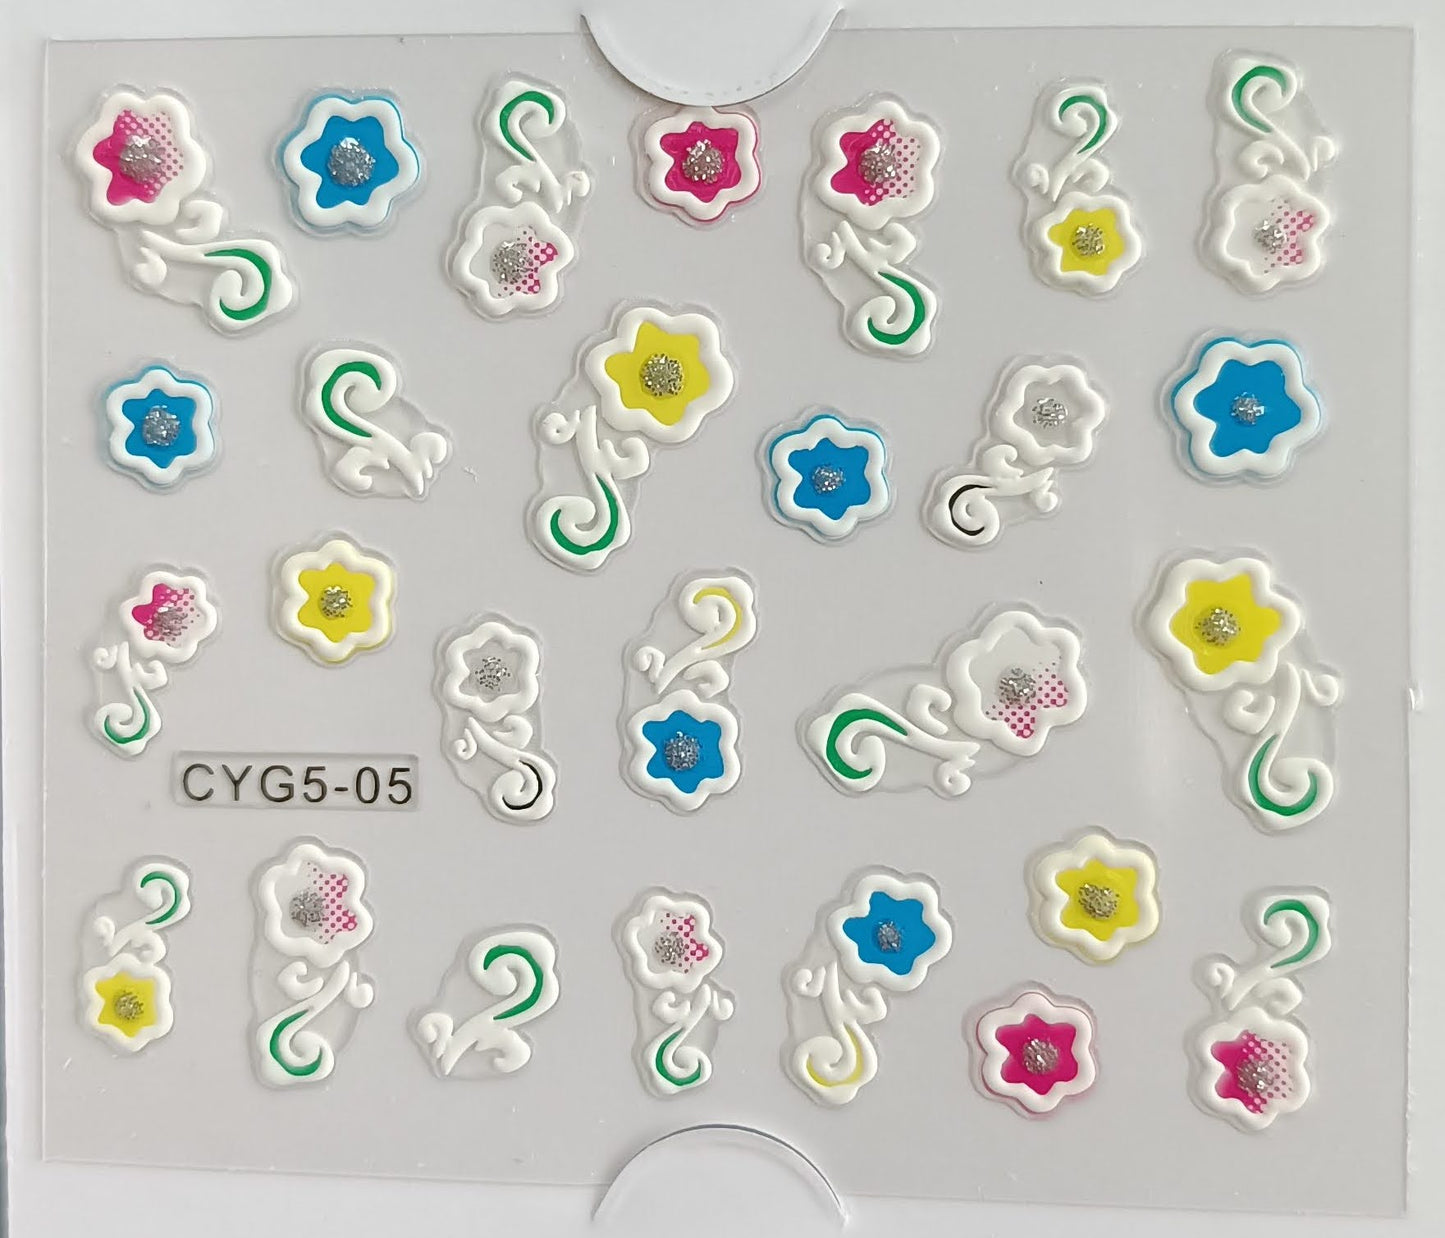 3D Self-Adhesive Nail Art Stickers - Multicolor Flowers 05